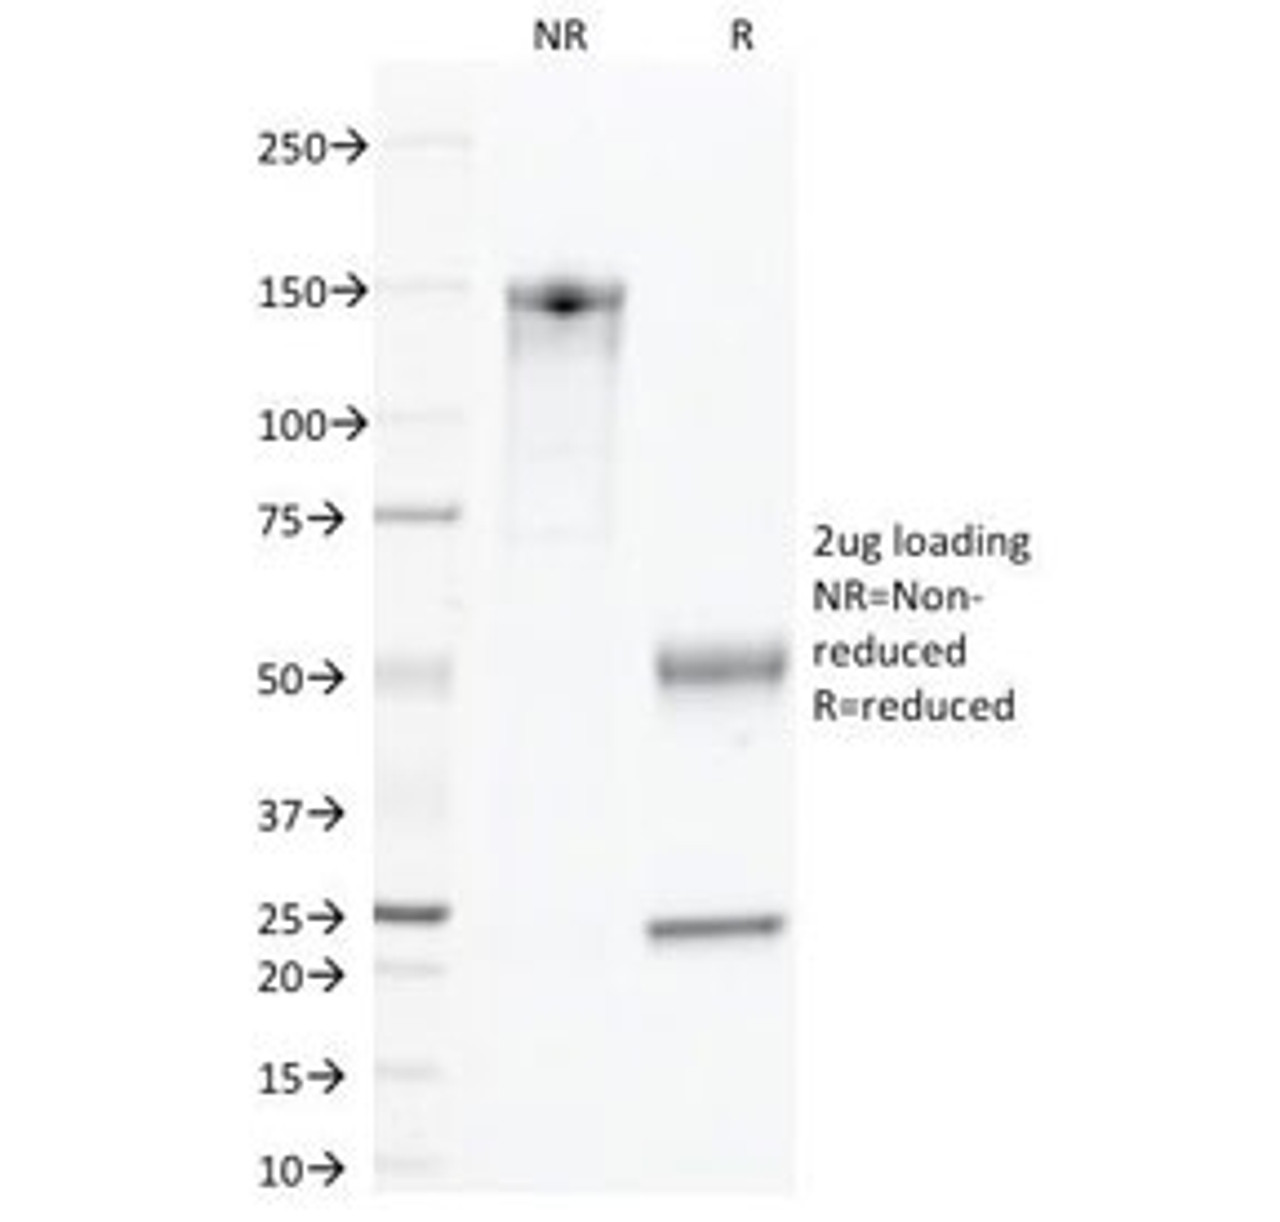 SDS-PAGE Analysis of Purified, BSA-Free CD45 Antibody (clone 135-4C5) . Confirmation of Integrity and Purity of the Antibody.